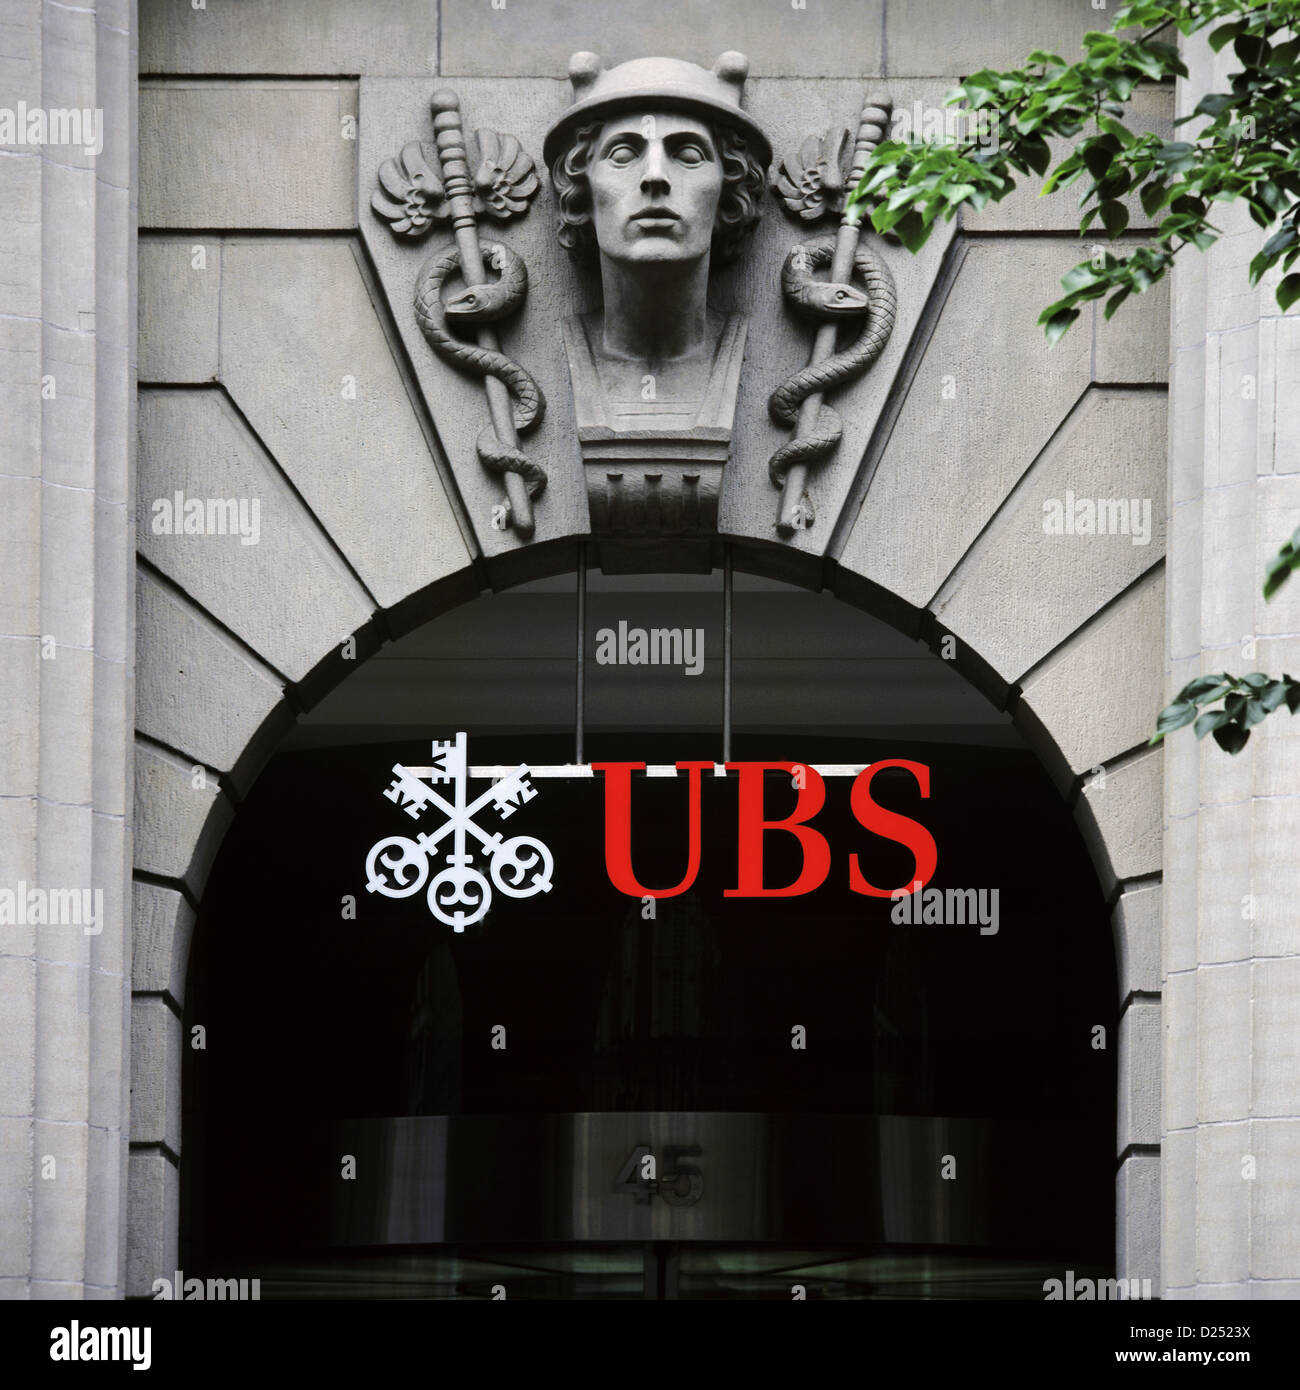 Zurich, Switzerland, the entrance portal of the United Bank of Switzerland (UBS) Stock Photo